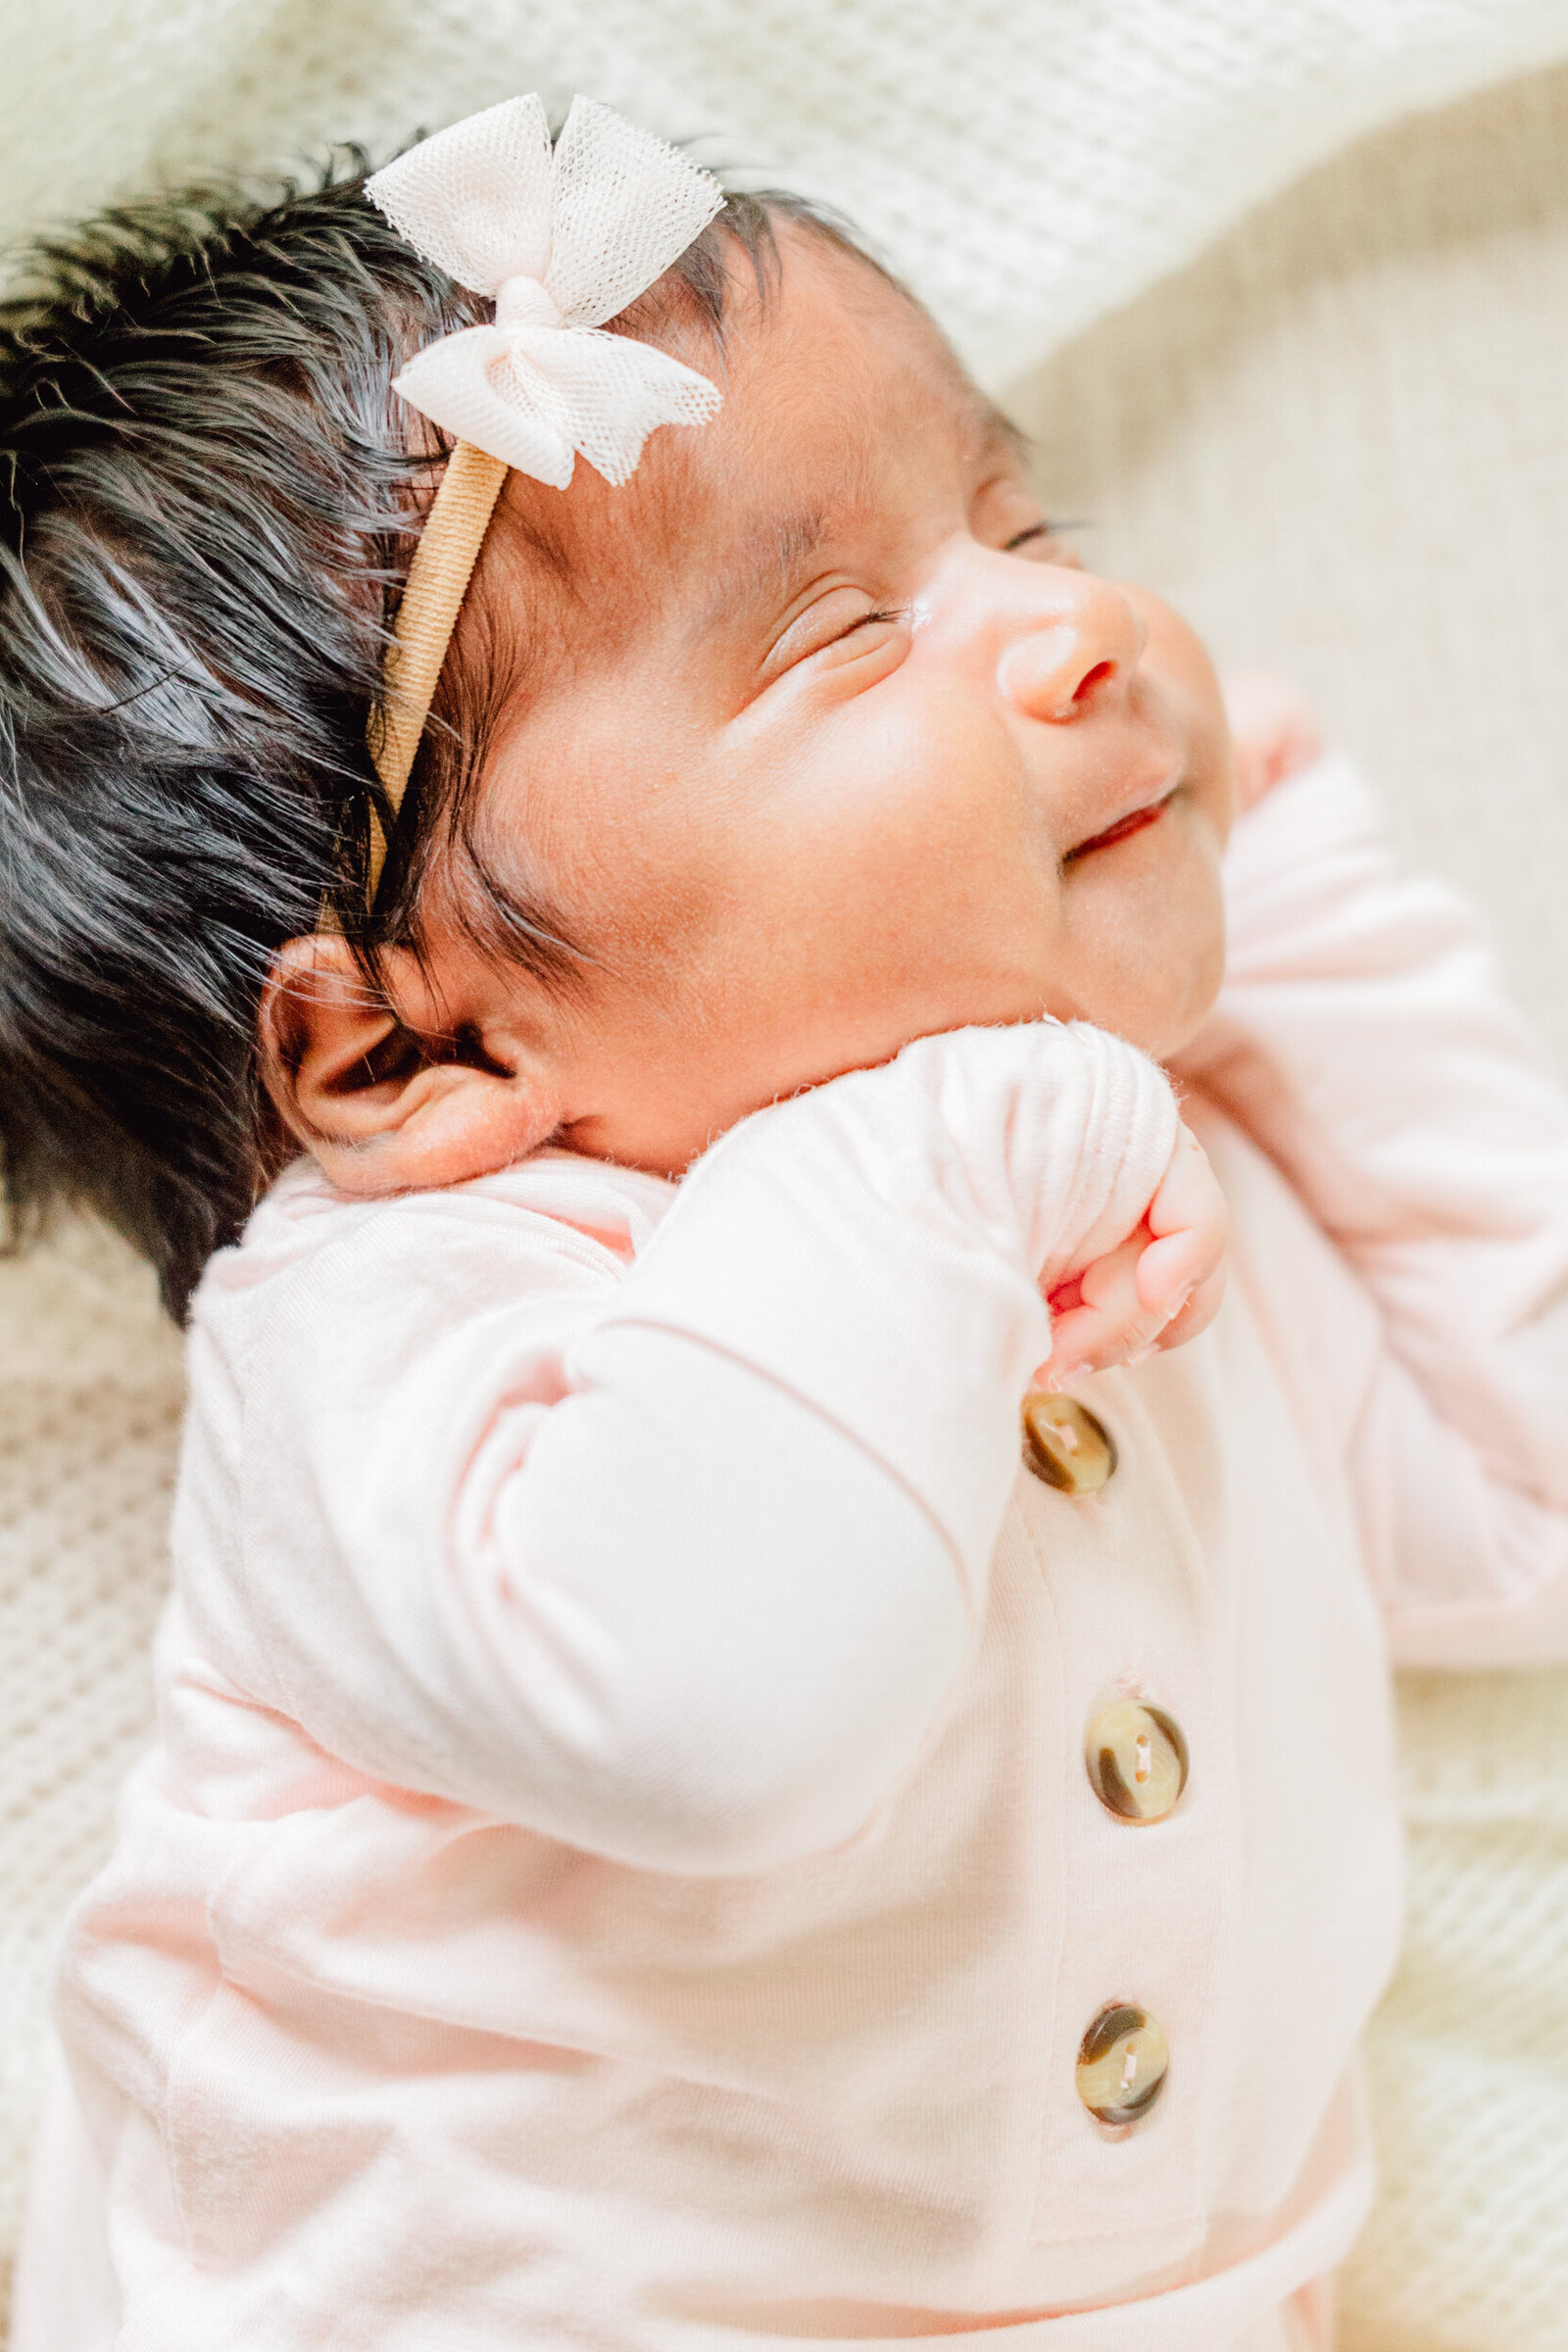 Newborn with dark hair smiles with her hand near her mouth